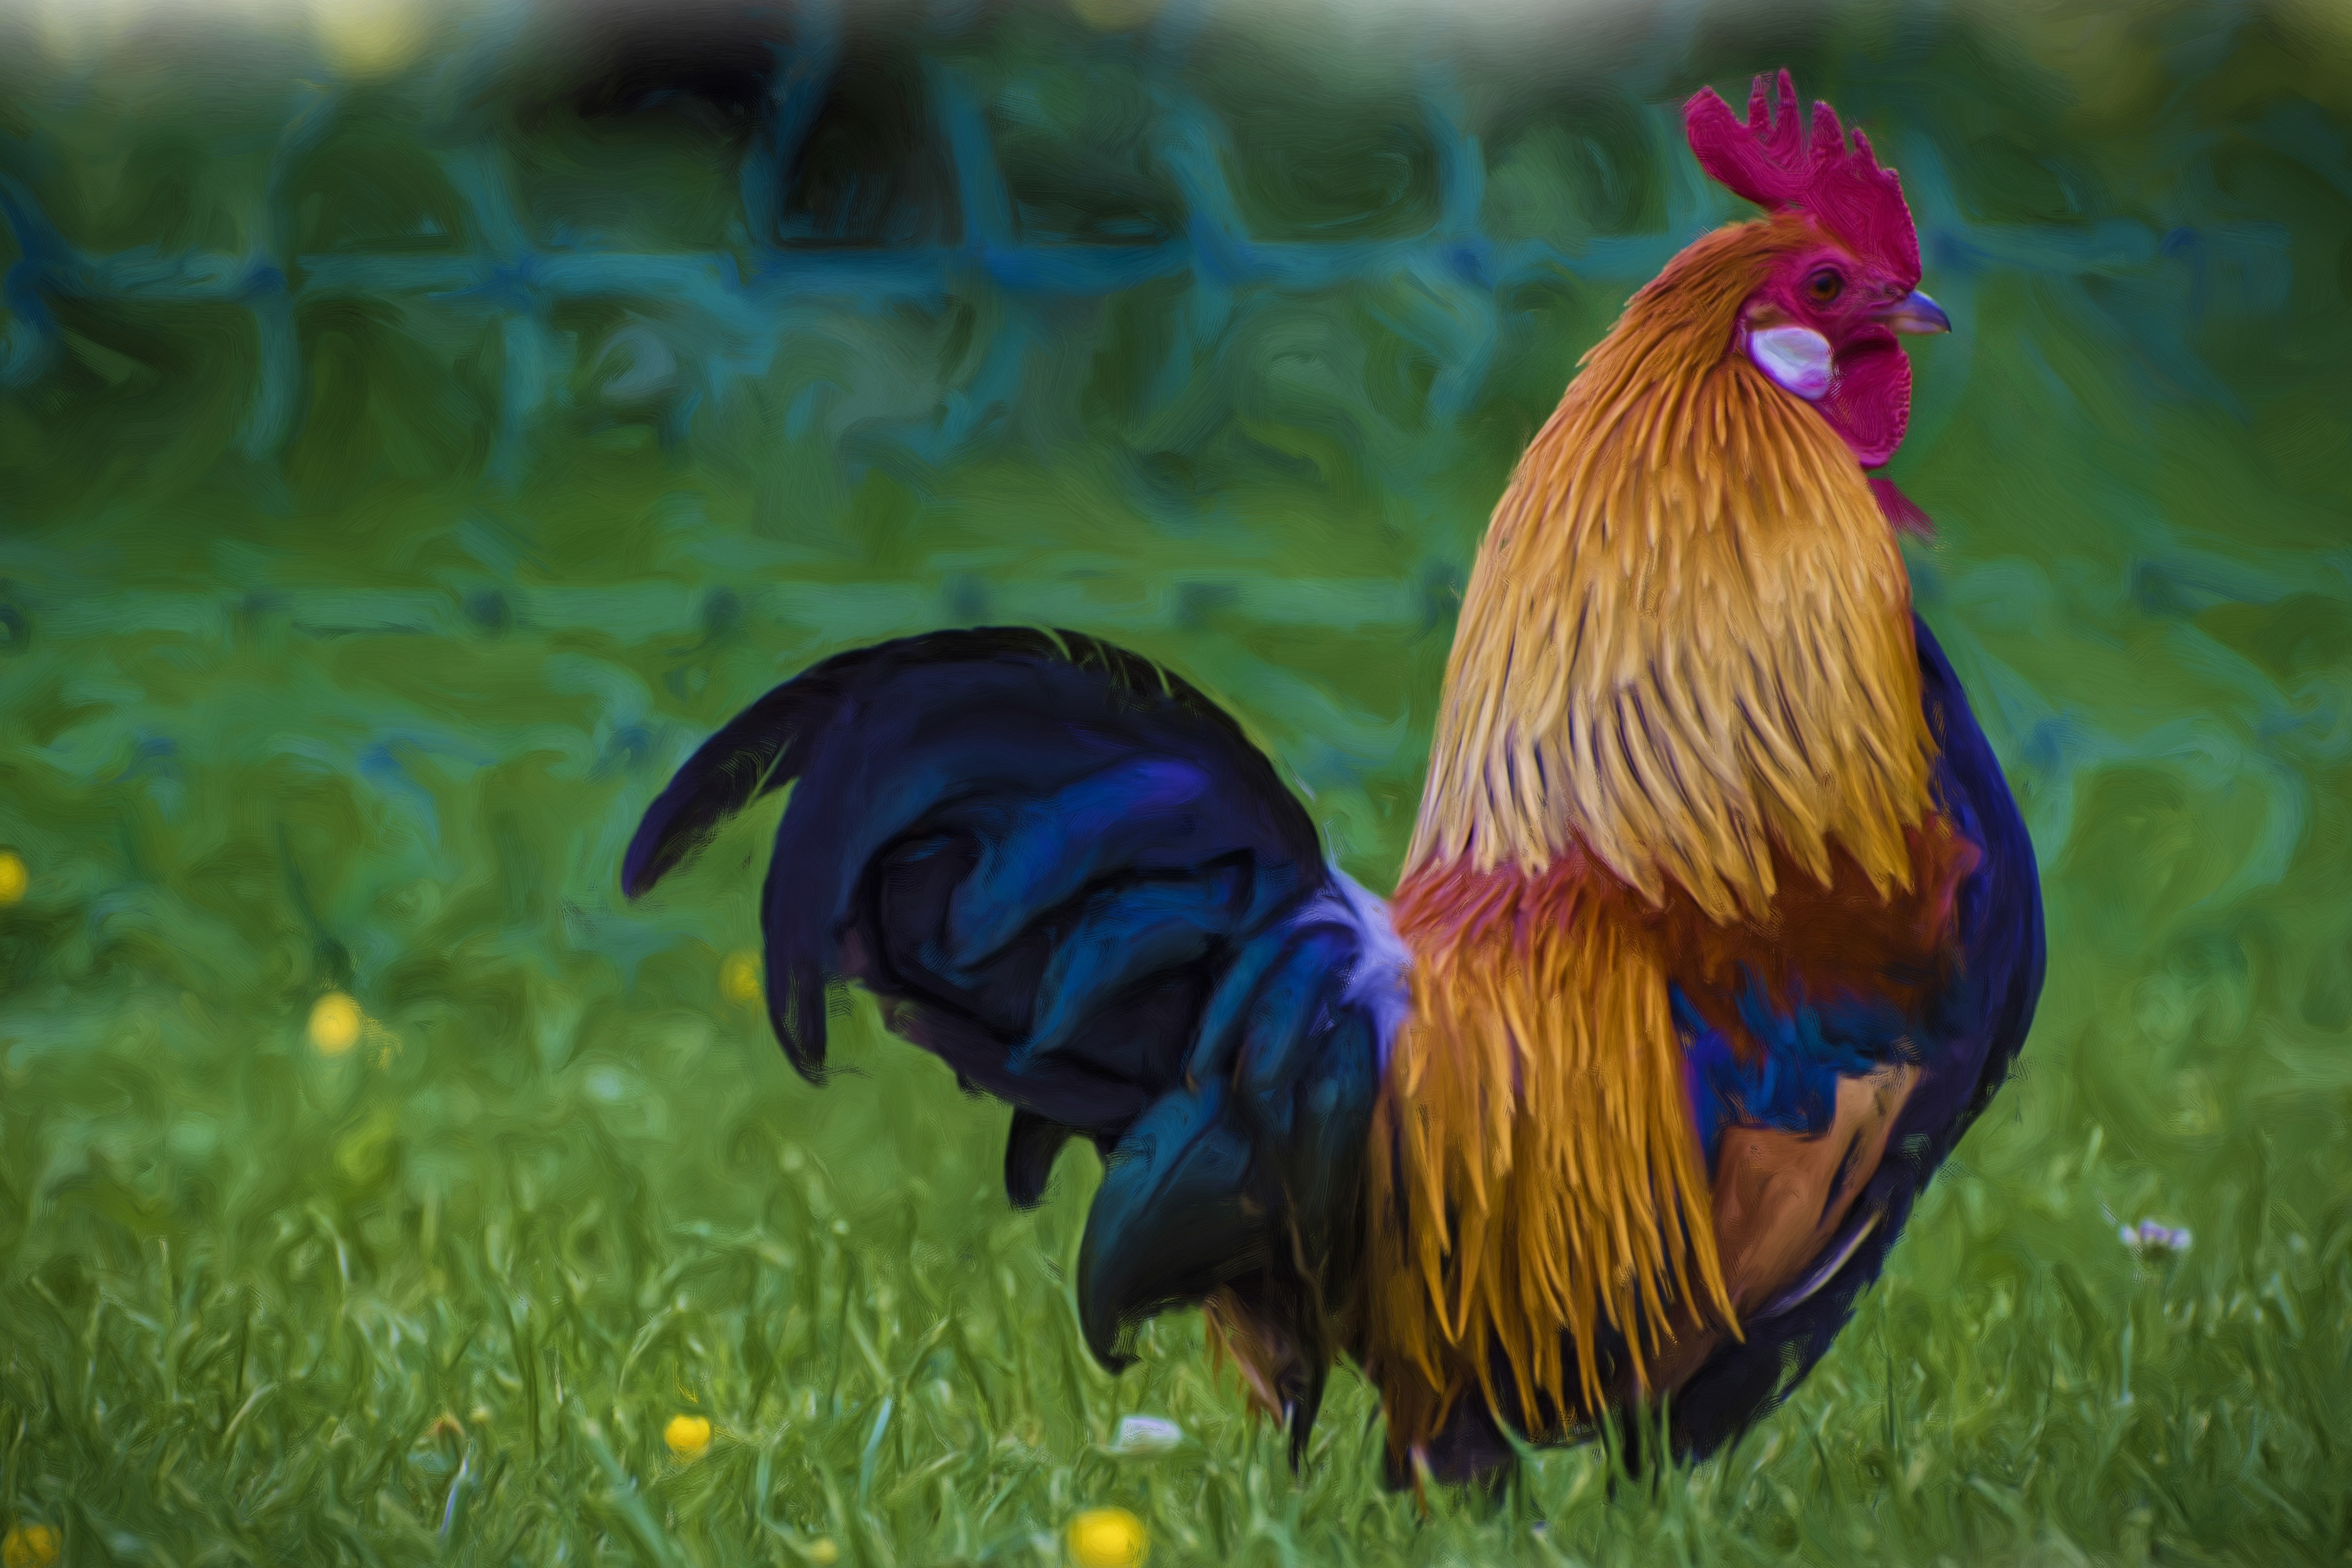 Artistic Bird Chicken Oil Painting Painting Rooster 4272x2848